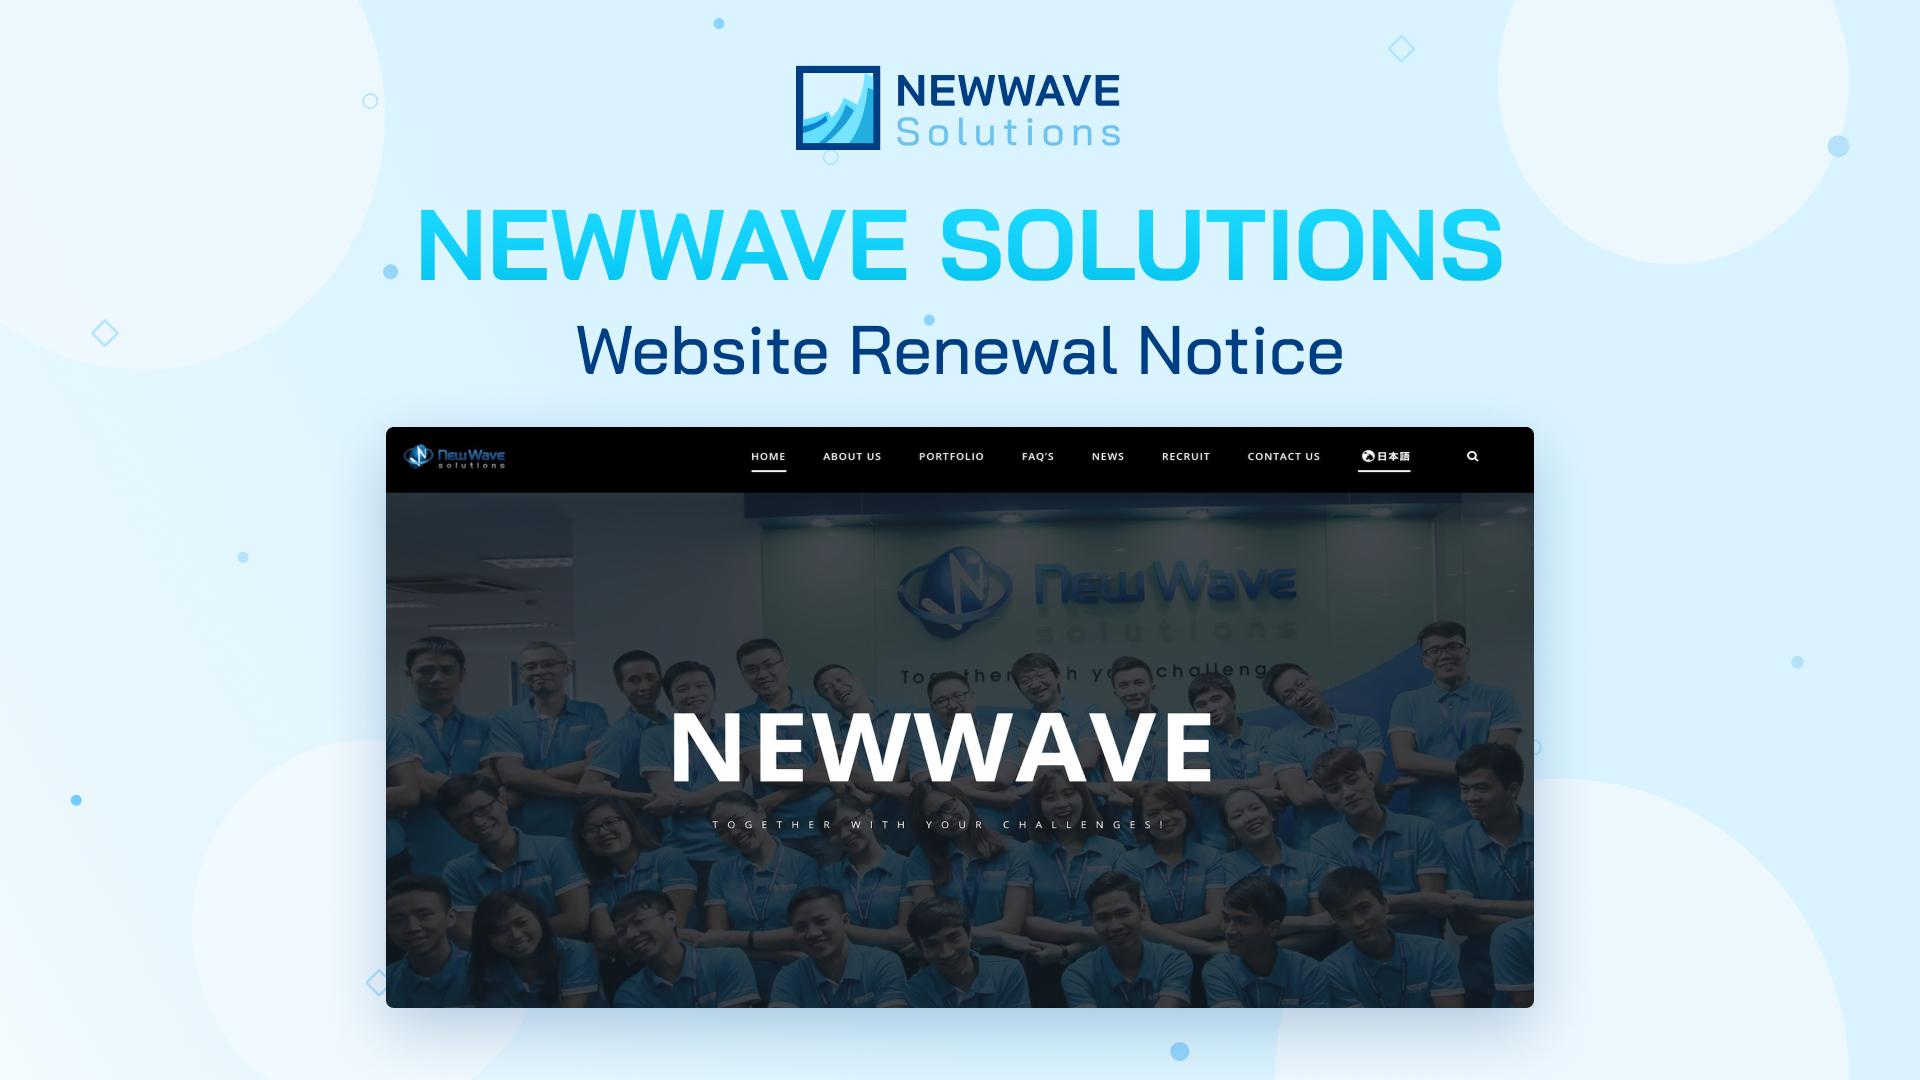 Newwave Solutions Website Renewal Notice